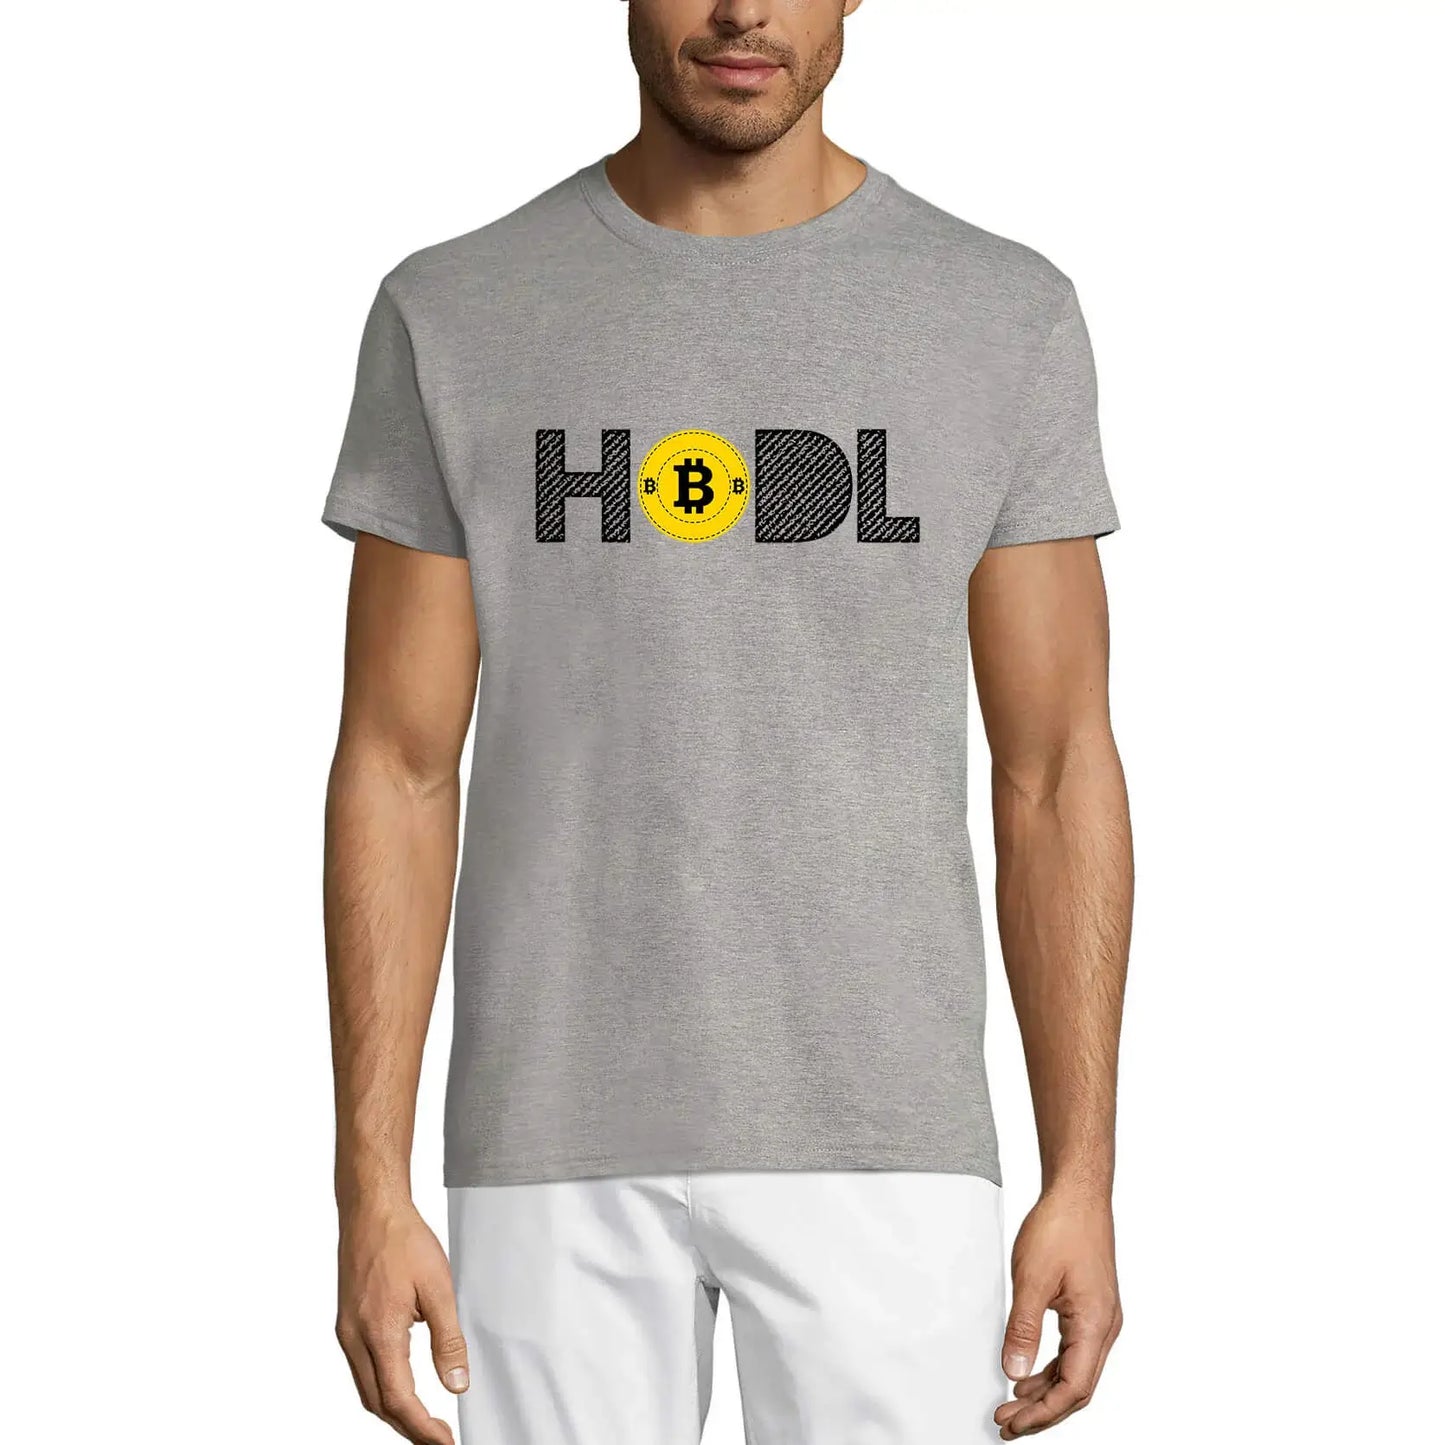 Men's Graphic T-Shirt Bitcoin Blockchain Currency - Hodl For Traders Eco-Friendly Limited Edition Short Sleeve Tee-Shirt Vintage Birthday Gift Novelty